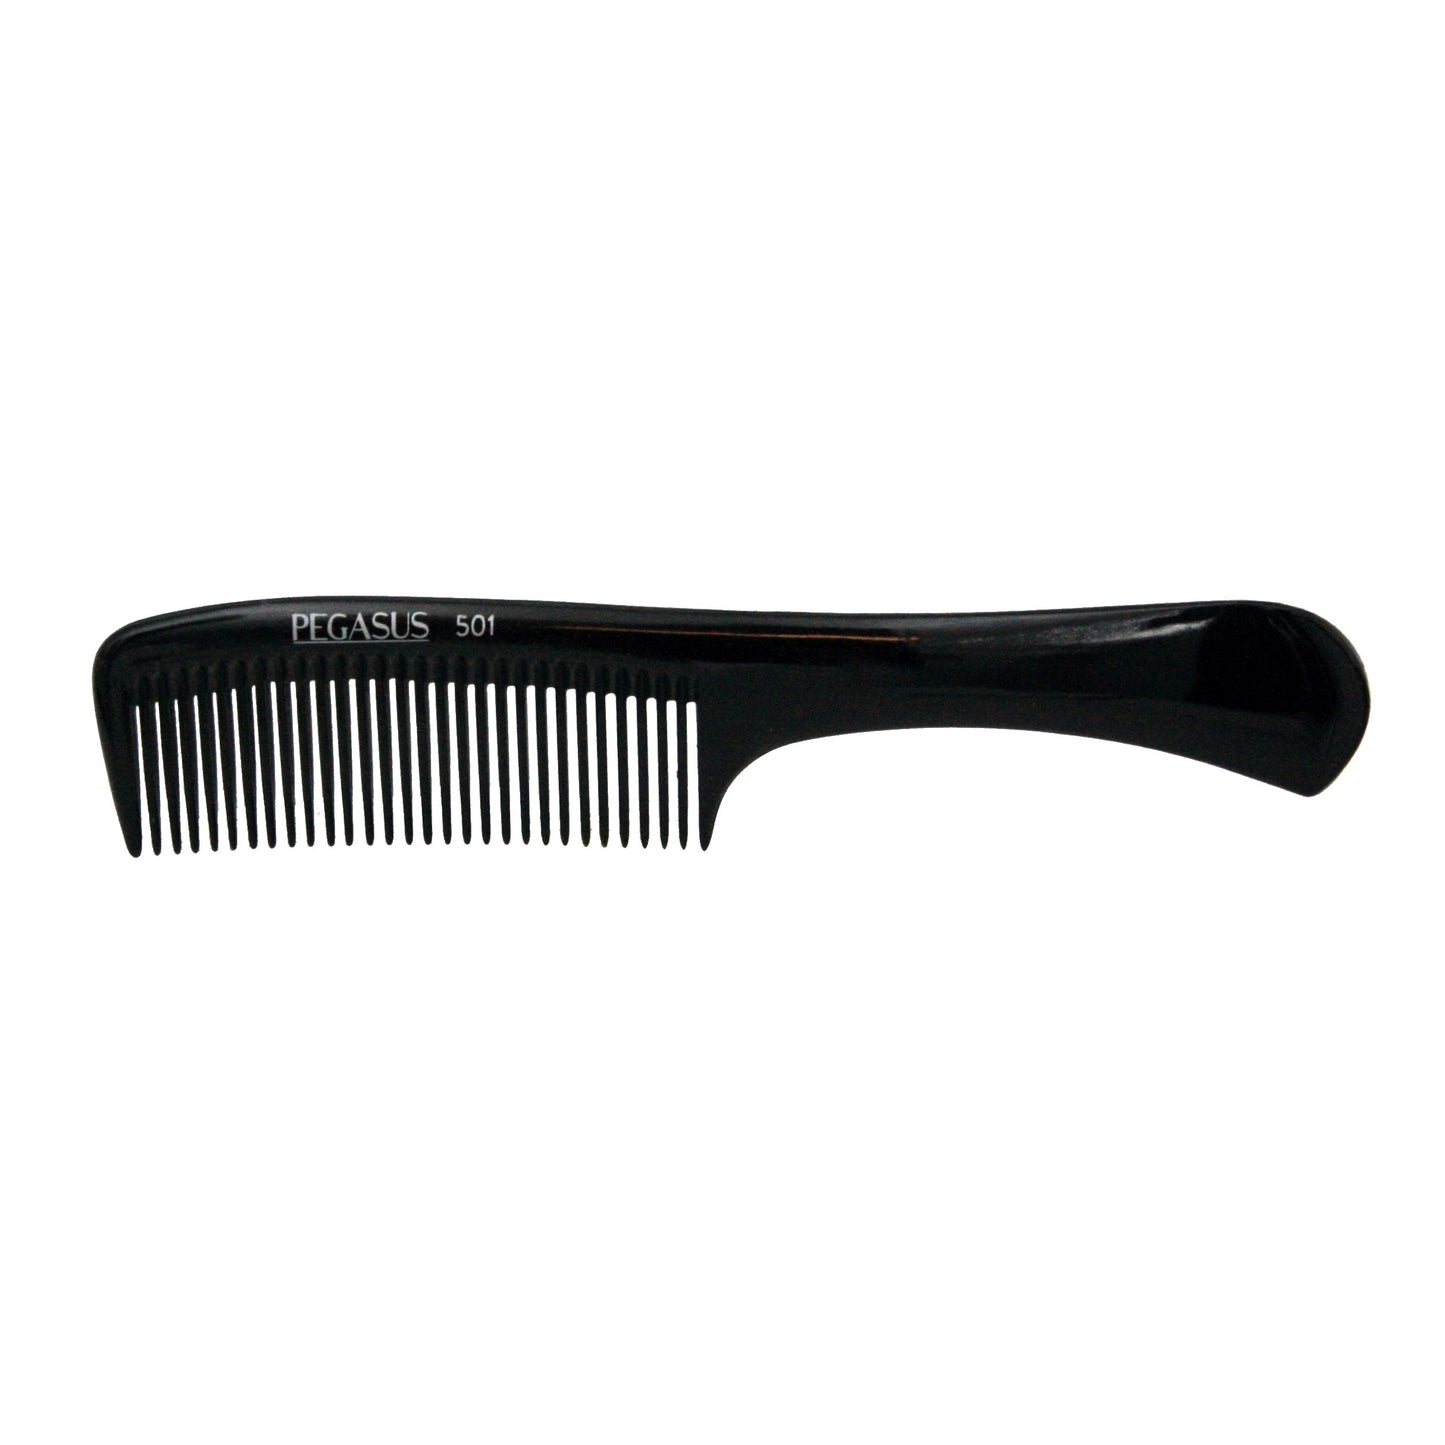 Pegasus 501, 9in Hard Rubber Handle Comb, Handmade, Seamless, Smooth Edges, Anti Static, Heat and Chemically Resistant, Wet Hair, Everyday Grooming Comb | Peines de goma dura - Black